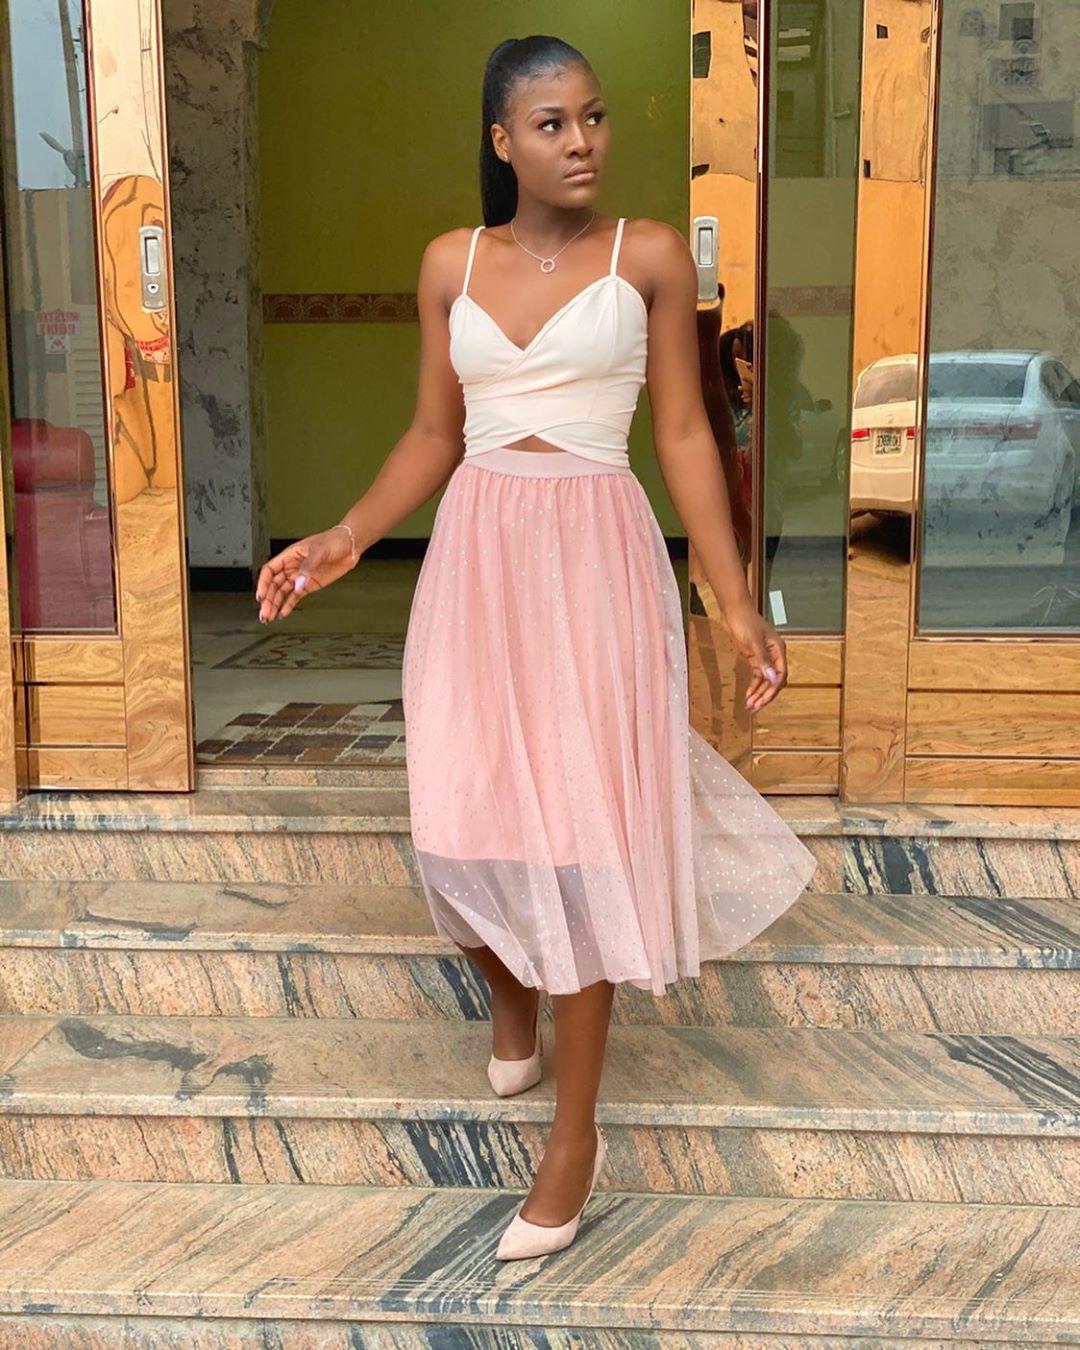 Alex unusual gives fans stunning look for Sunday